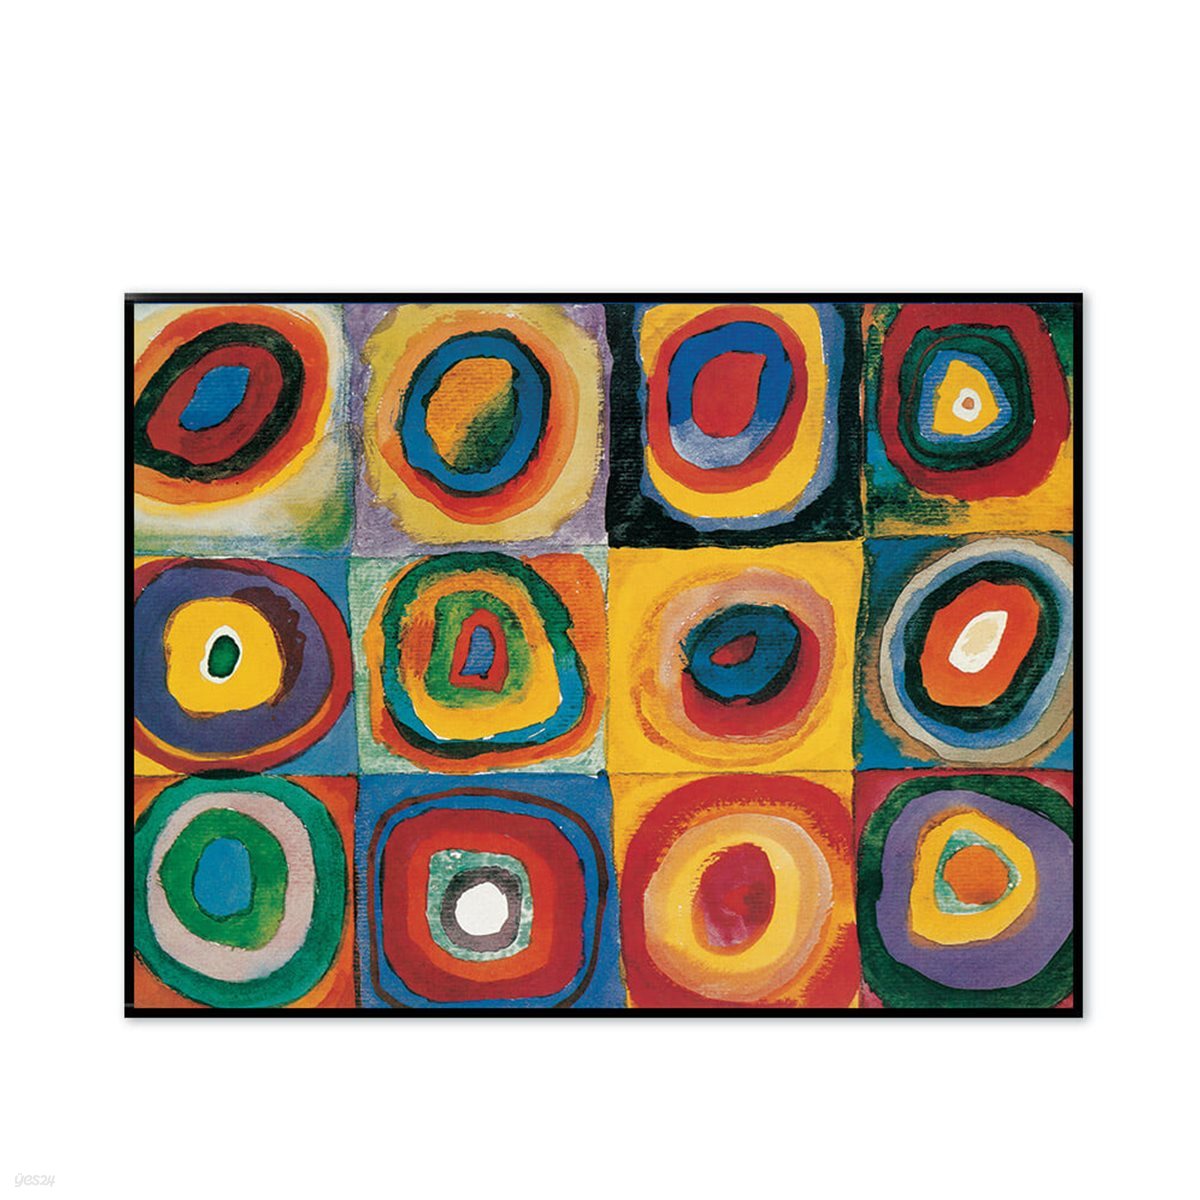 [The Bella] 칸딘스키 - 동심원 (색채연구) Squares with Concentric Circles (Color Study) 